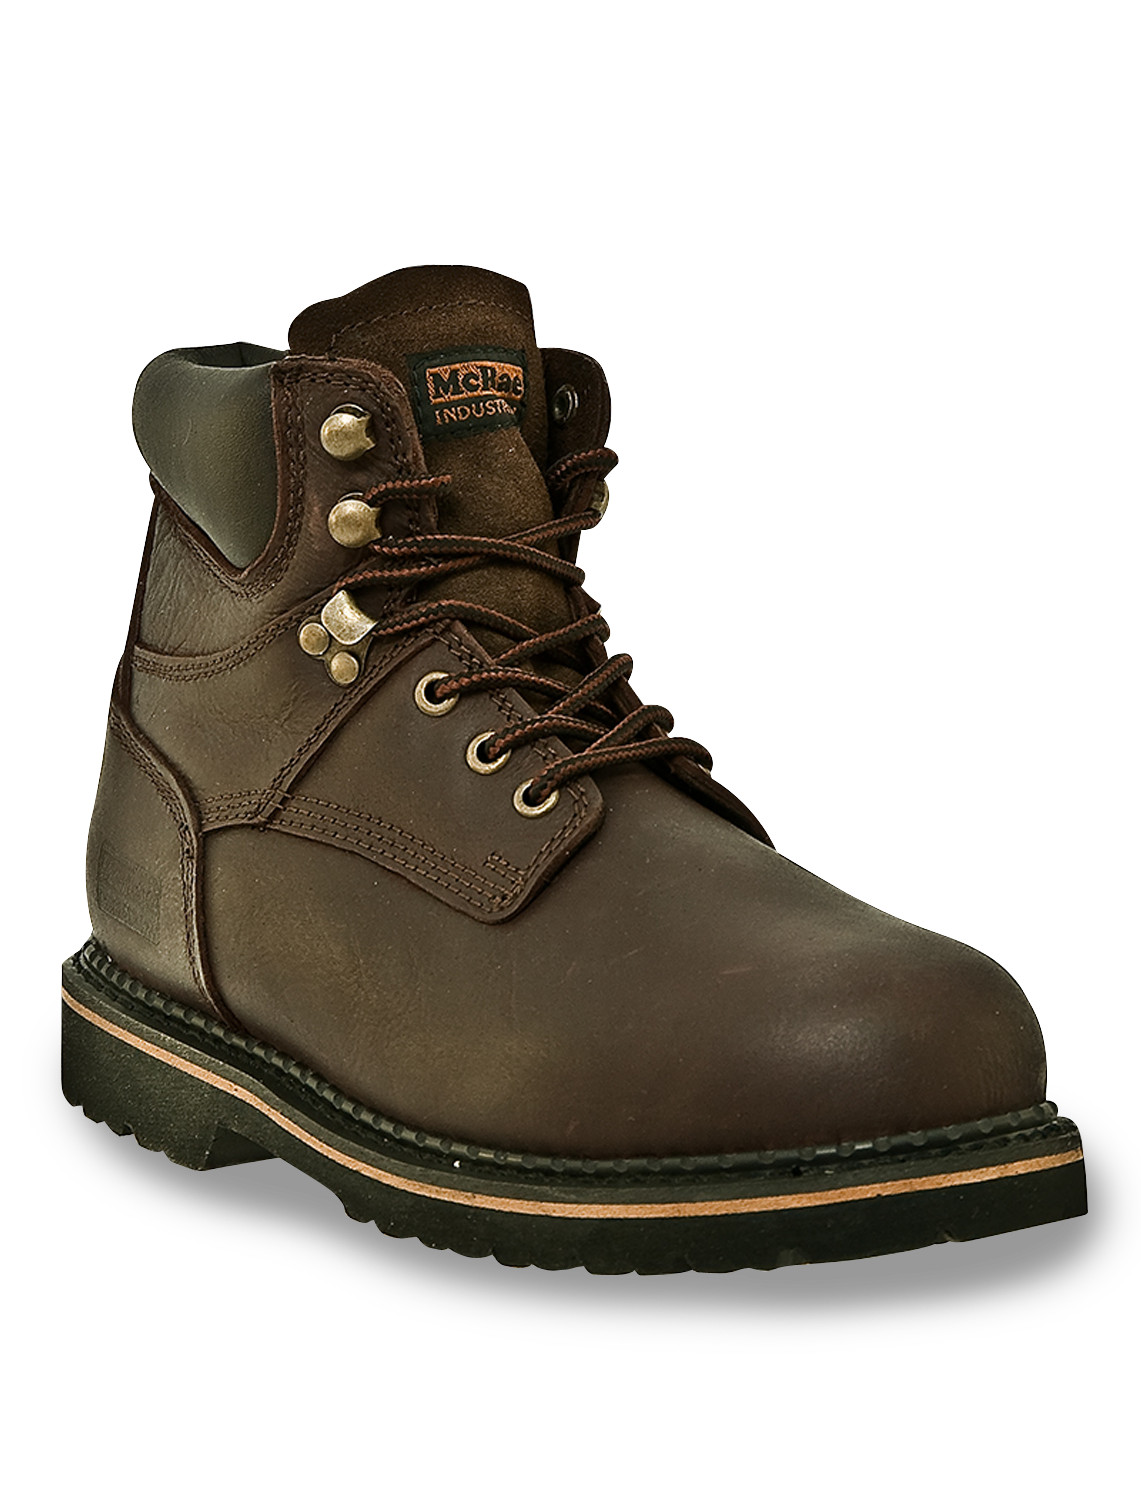 Work Boots | Big and Tall | DXL Casual Male